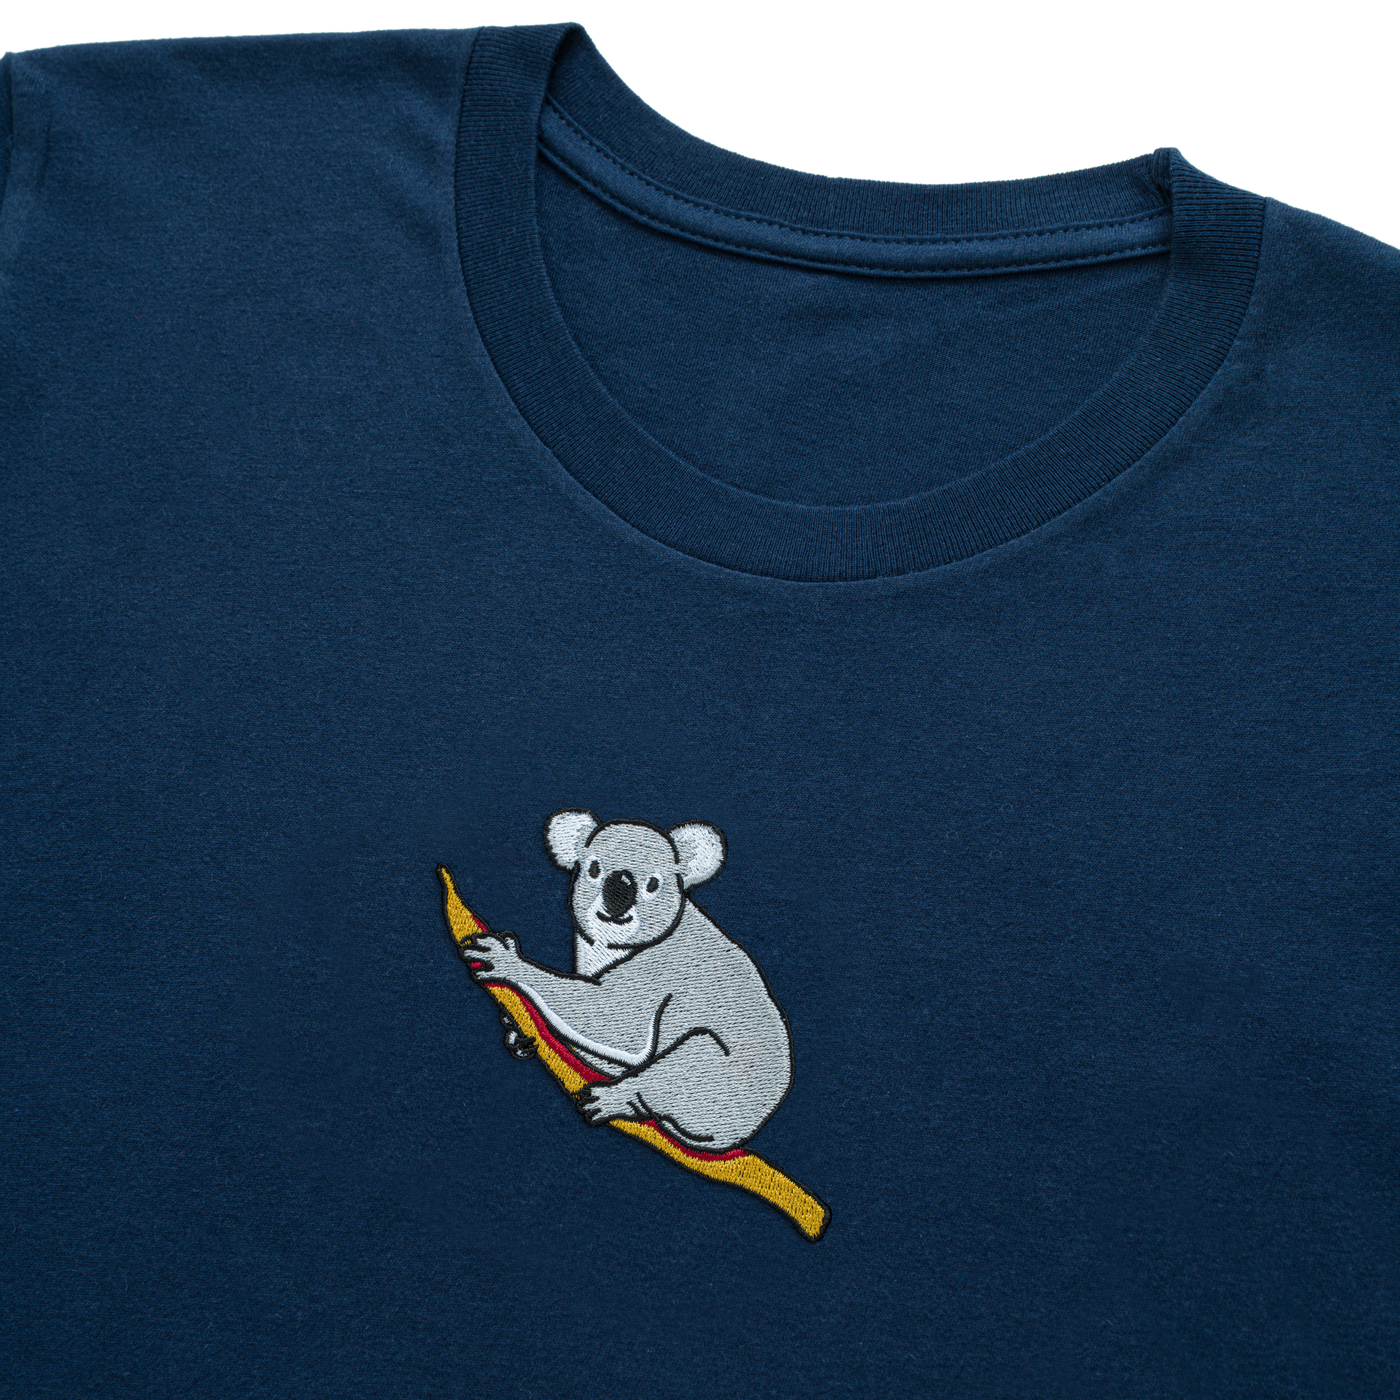 Bobby's Planet Kids Embroidered Koala T-Shirt from Australia Down Under Animals Collection in Navy Color#color_navy